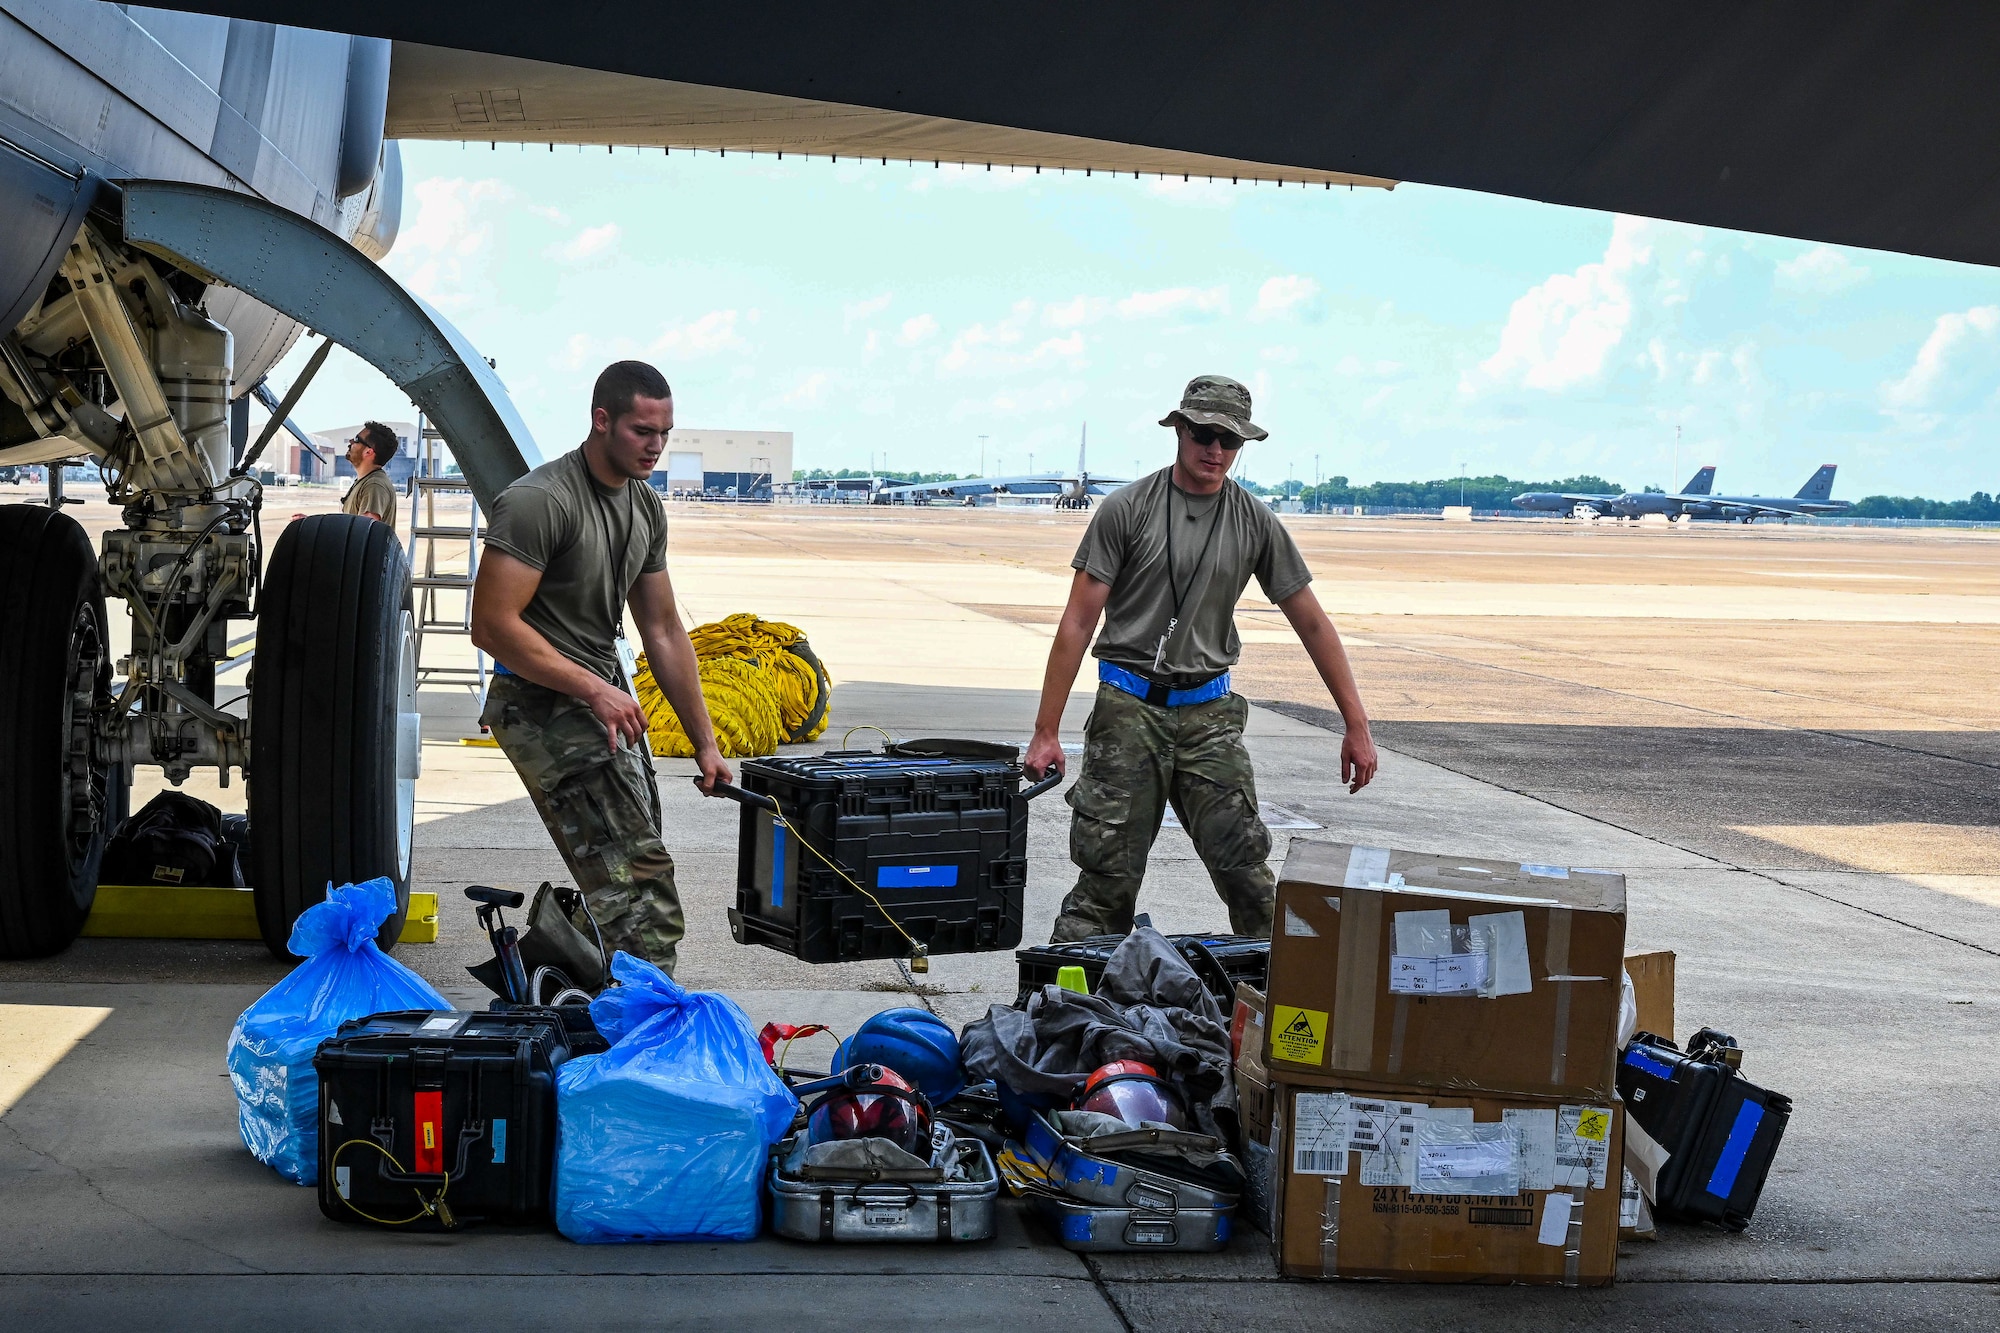 Airmen from the 2nd Aircraft Maintenance Squadron unload maintenance and support equipment from a B-52 On-board Cargo System after a Agile Combat Employment exercise at Barksdale Air Force Base, Louisiana, Aug. 19, 2022. The maintainers packed, loaded and unloaded the BOCS to practice the self-sustained logistics capabilities that forge successful aircraft regeneration at contingency locations. (U.S. Air Force photo by Airman Nicole Ledbetter)